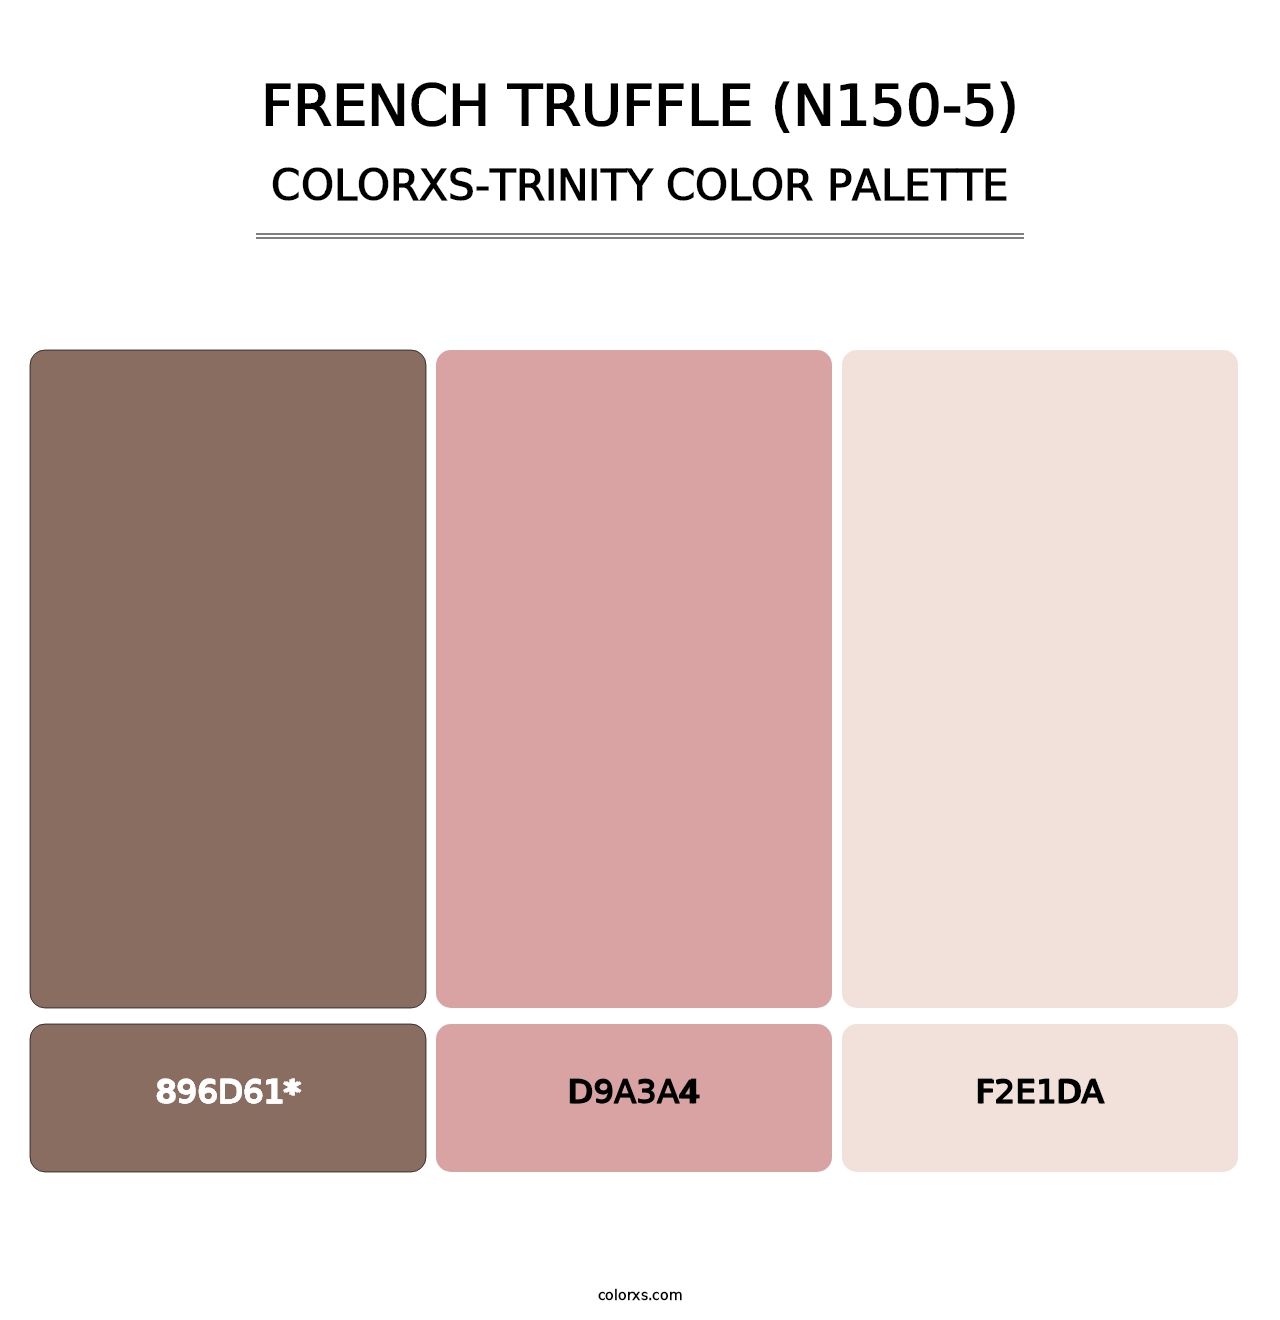 French Truffle (N150-5) - Colorxs Trinity Palette